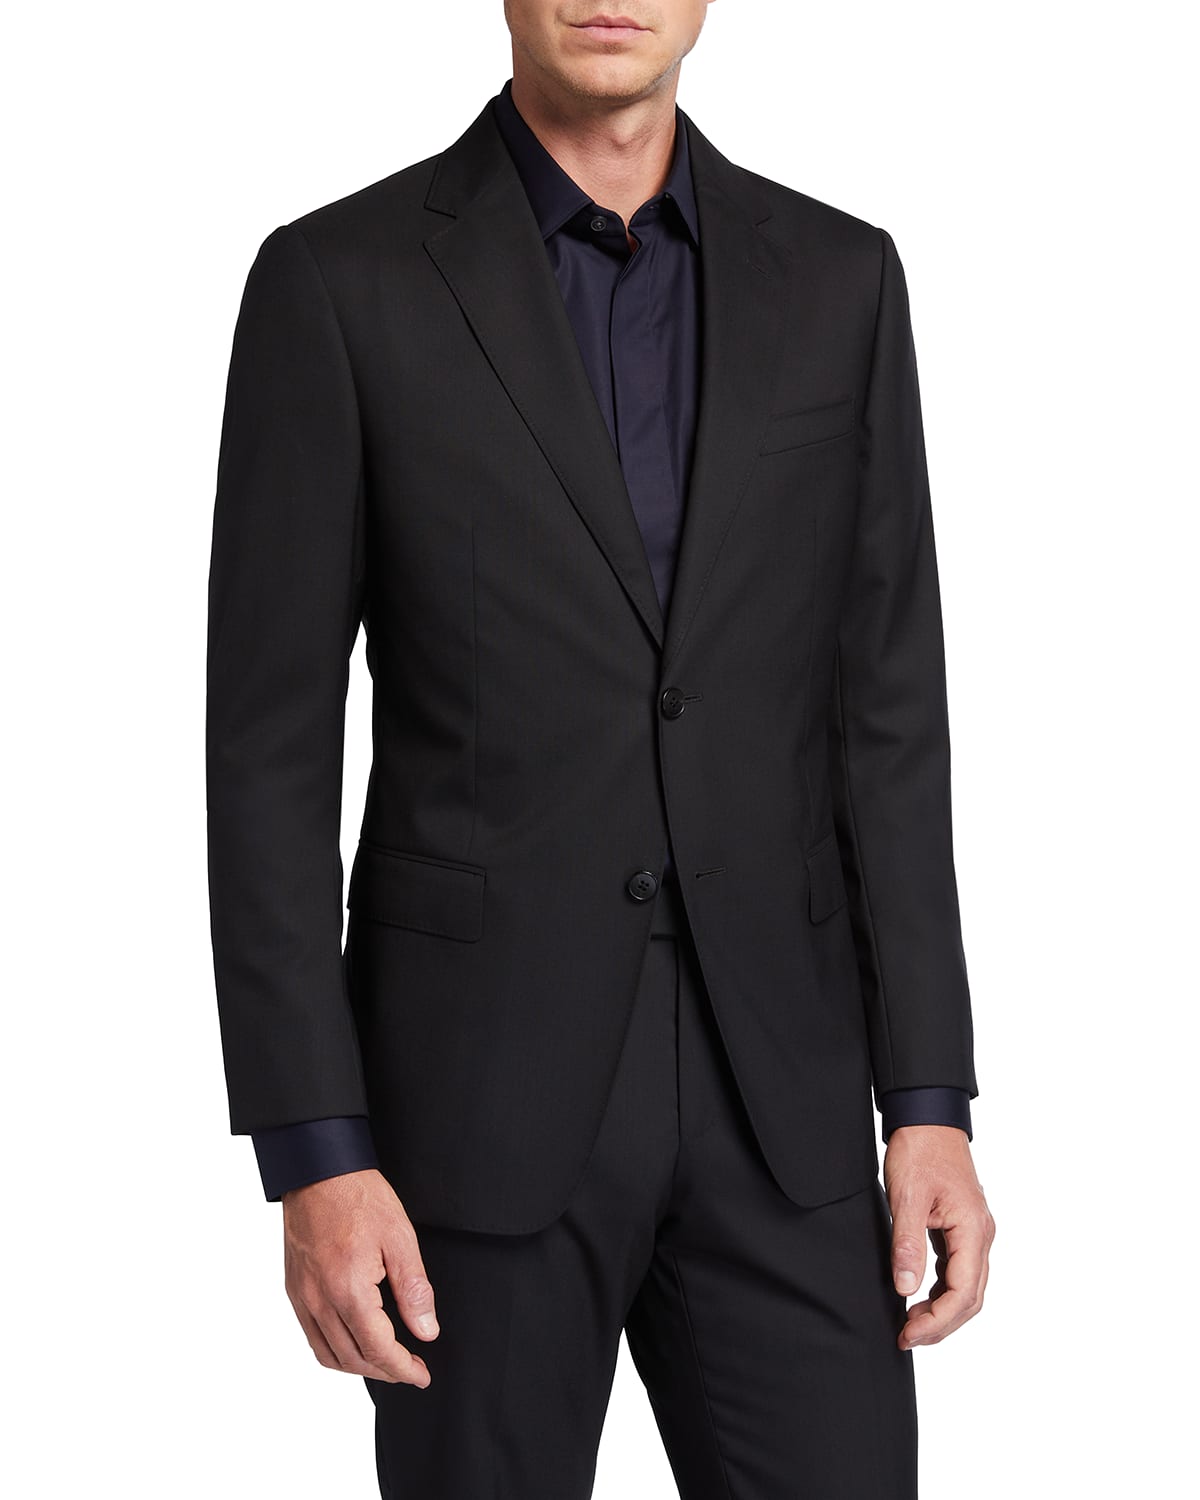 Z Zegna Men's Two-Piece Solid Wool Travel Suit